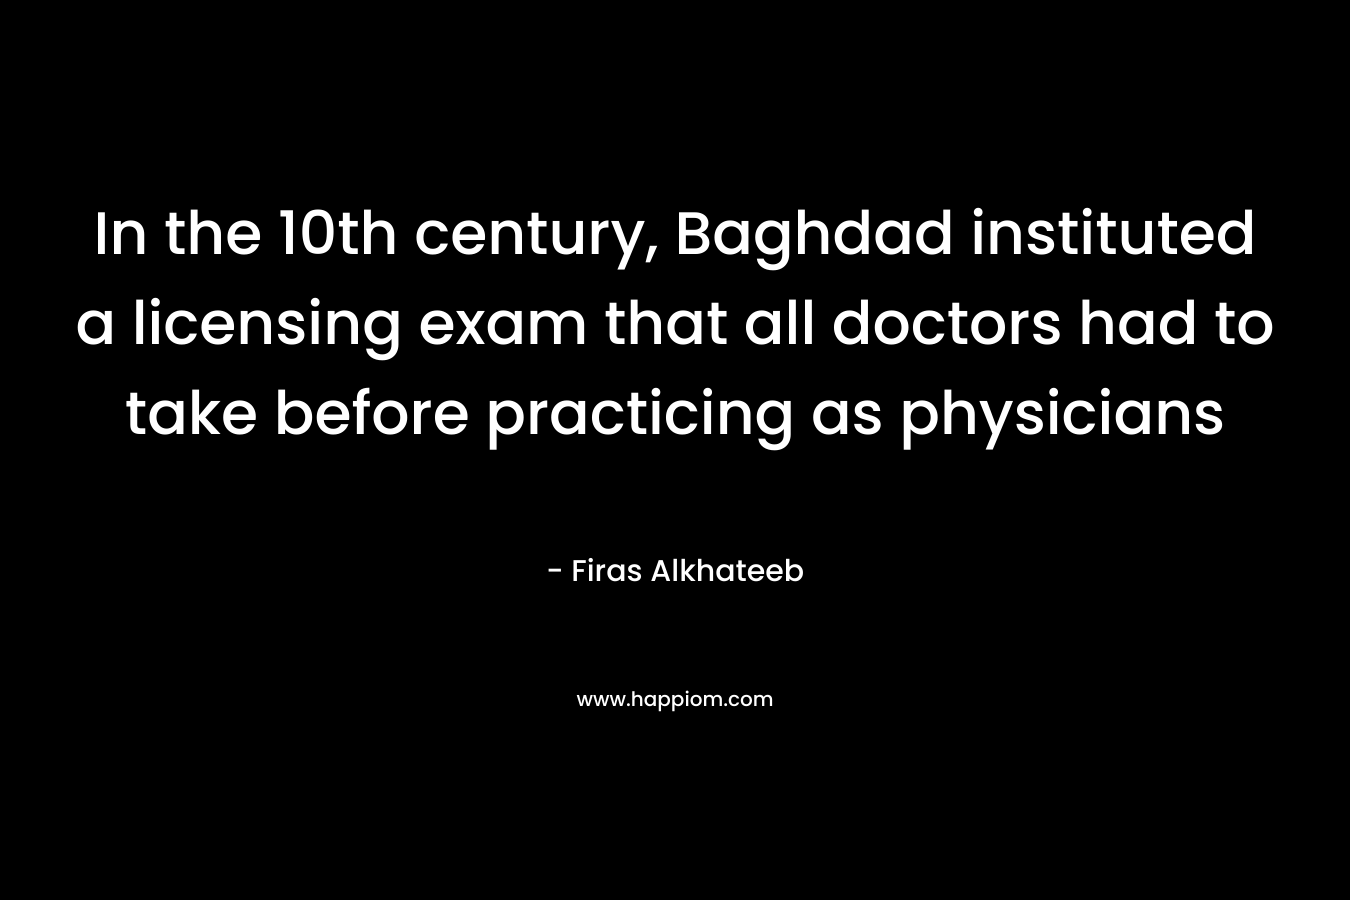 In the 10th century, Baghdad instituted a licensing exam that all doctors had to take before practicing as physicians – Firas Alkhateeb